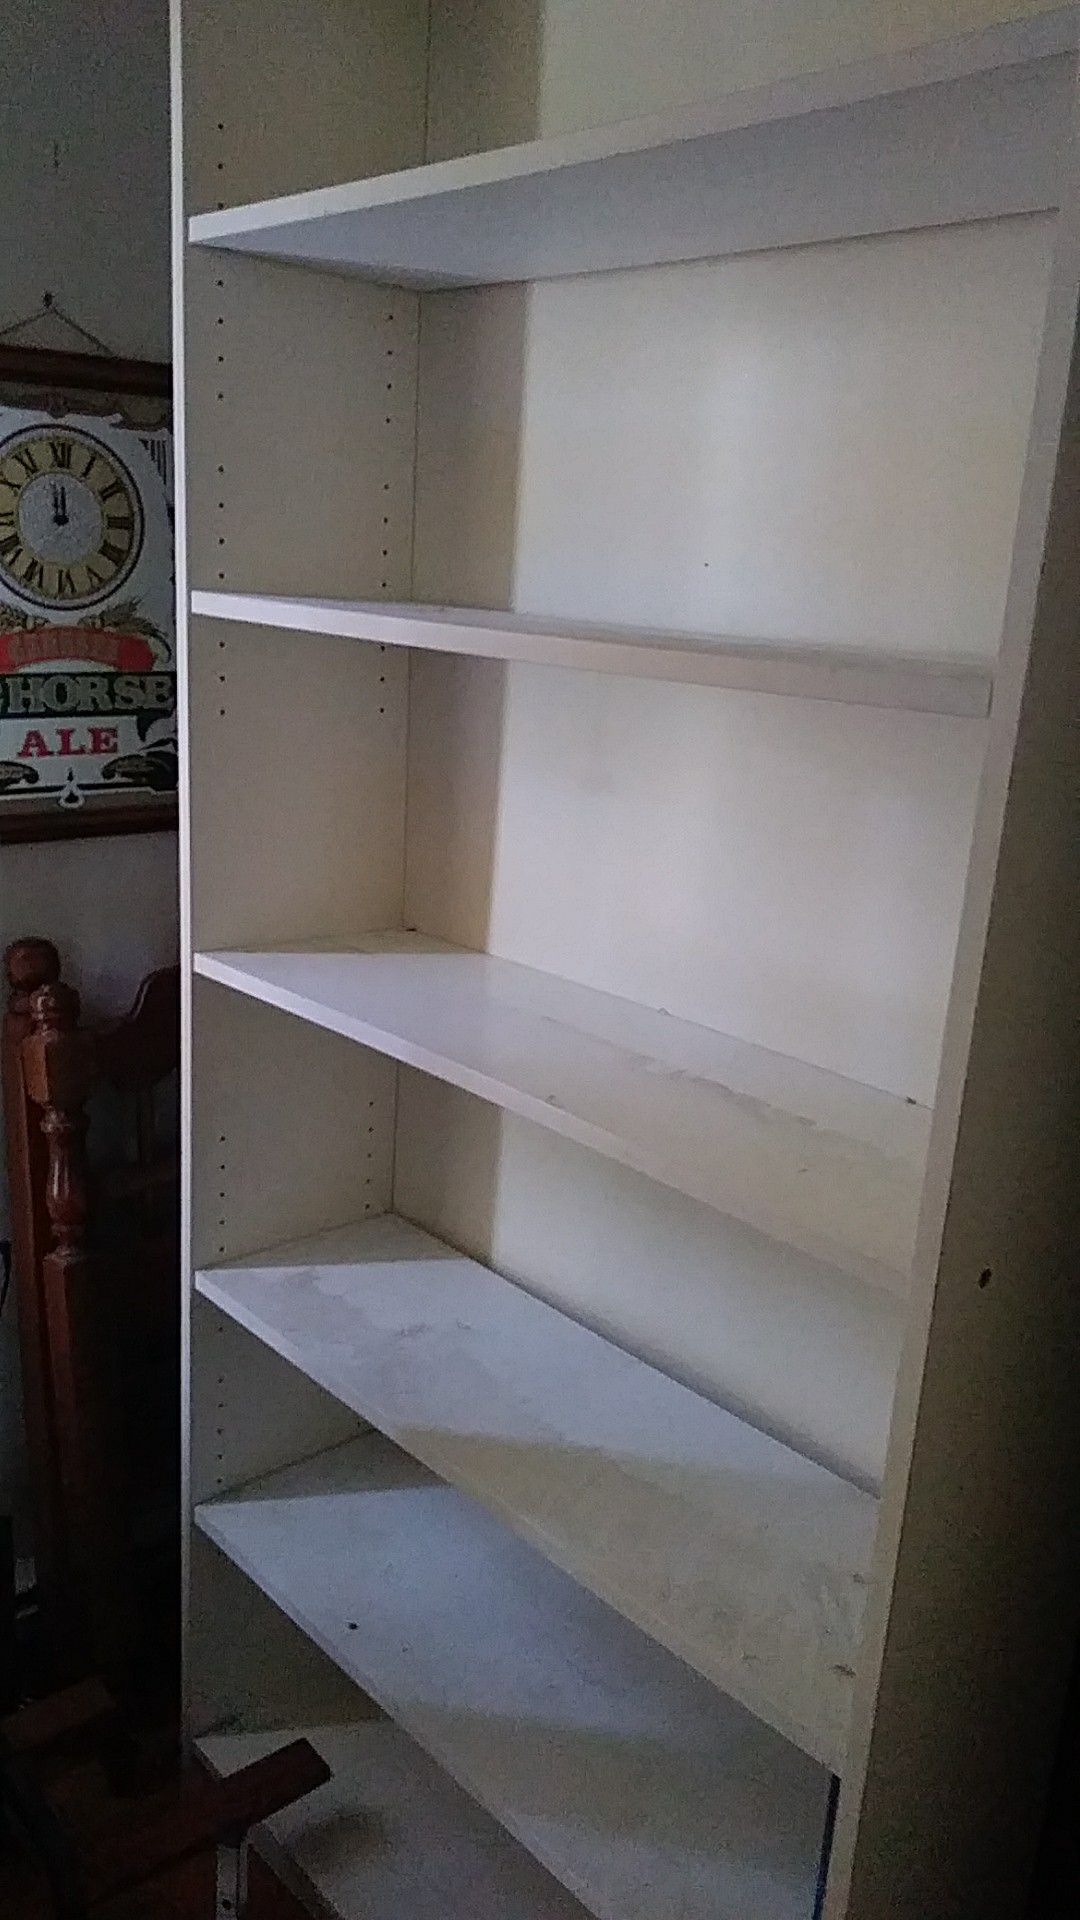 2 Bookcases good shape will accept offers.